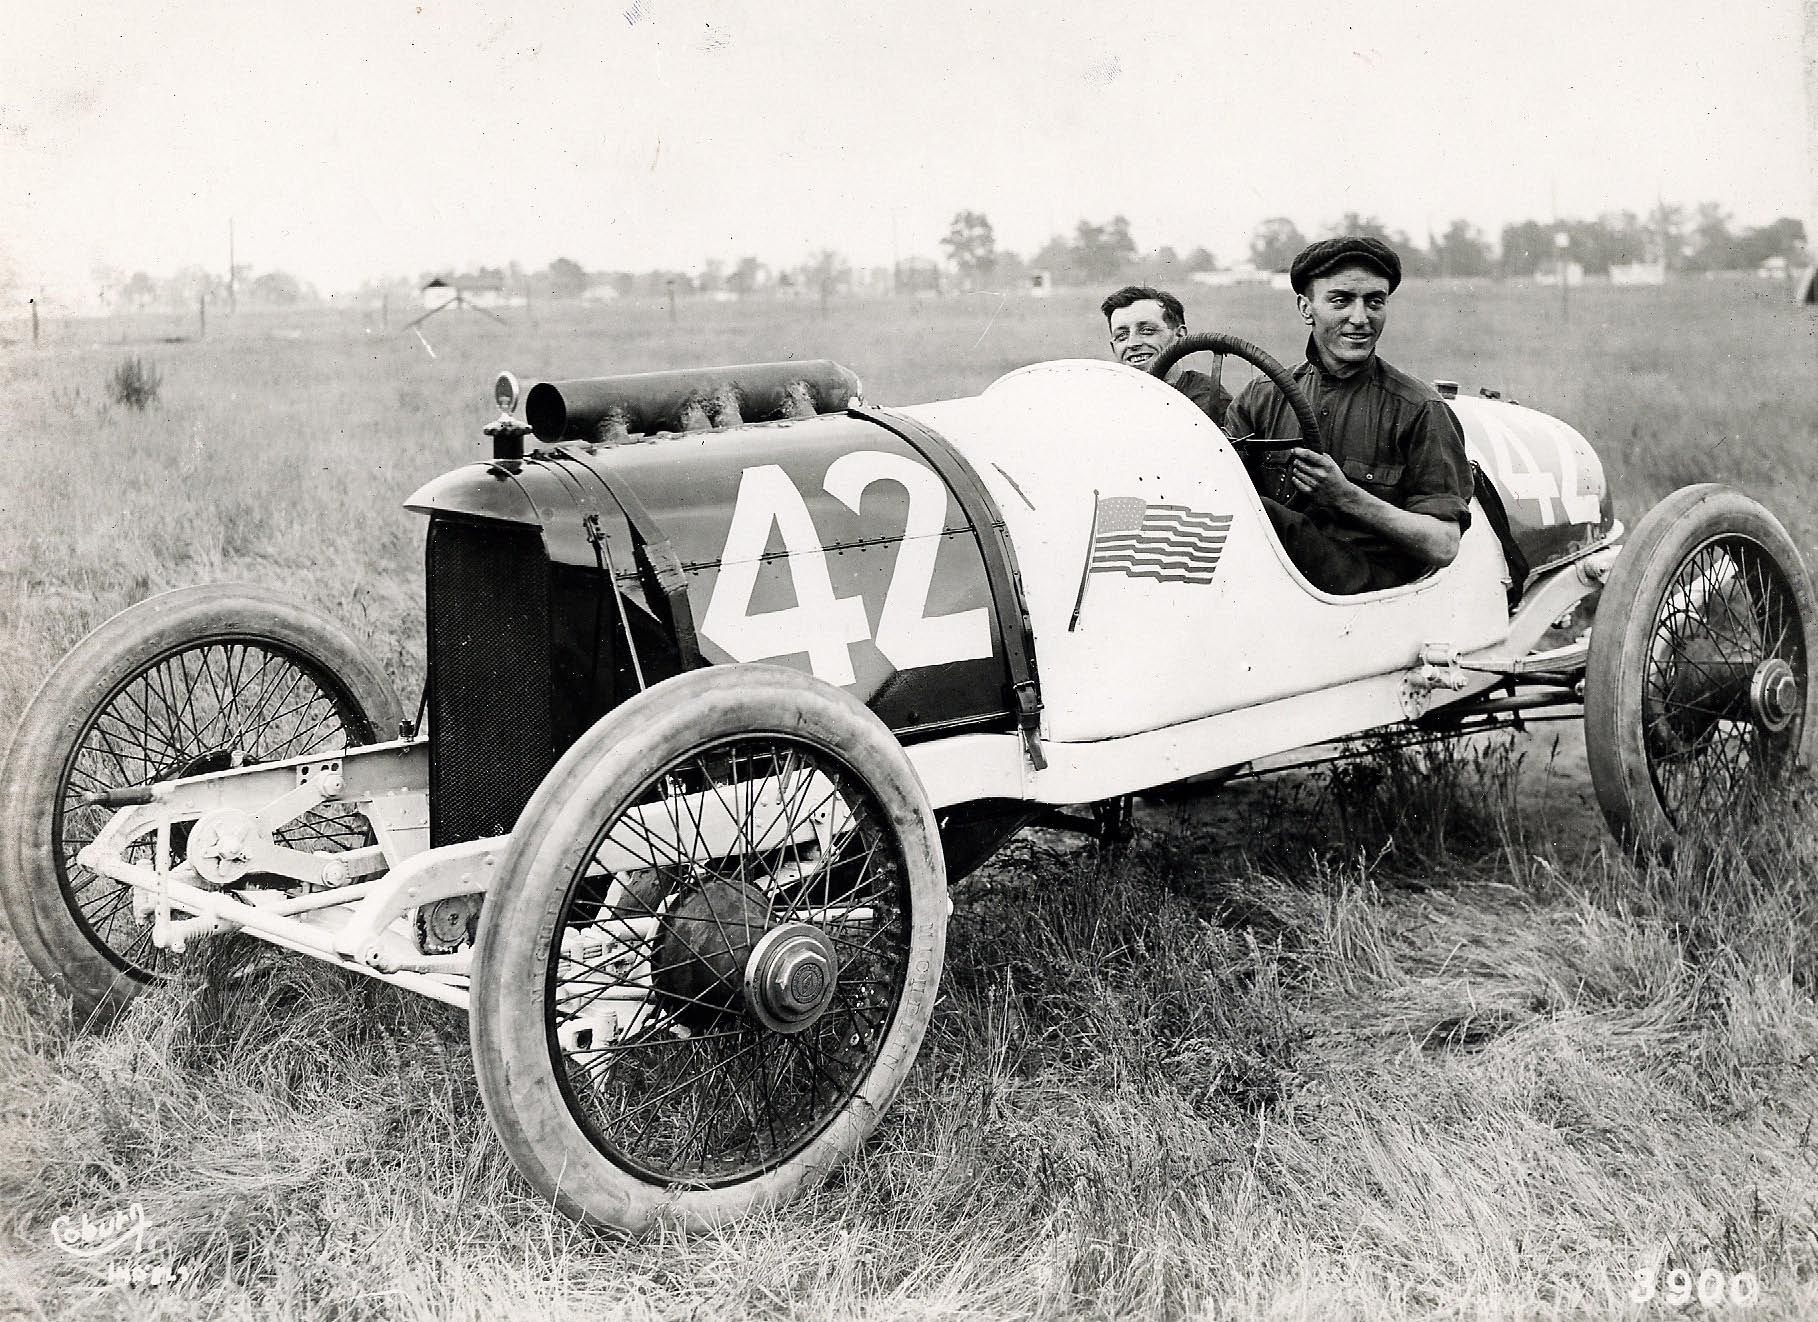 "Fast Eddie" Rickenbacker raced this Deusenberg in the 1914 Indianapolis 500 mile race. He finished in 10th place. (Coburg)